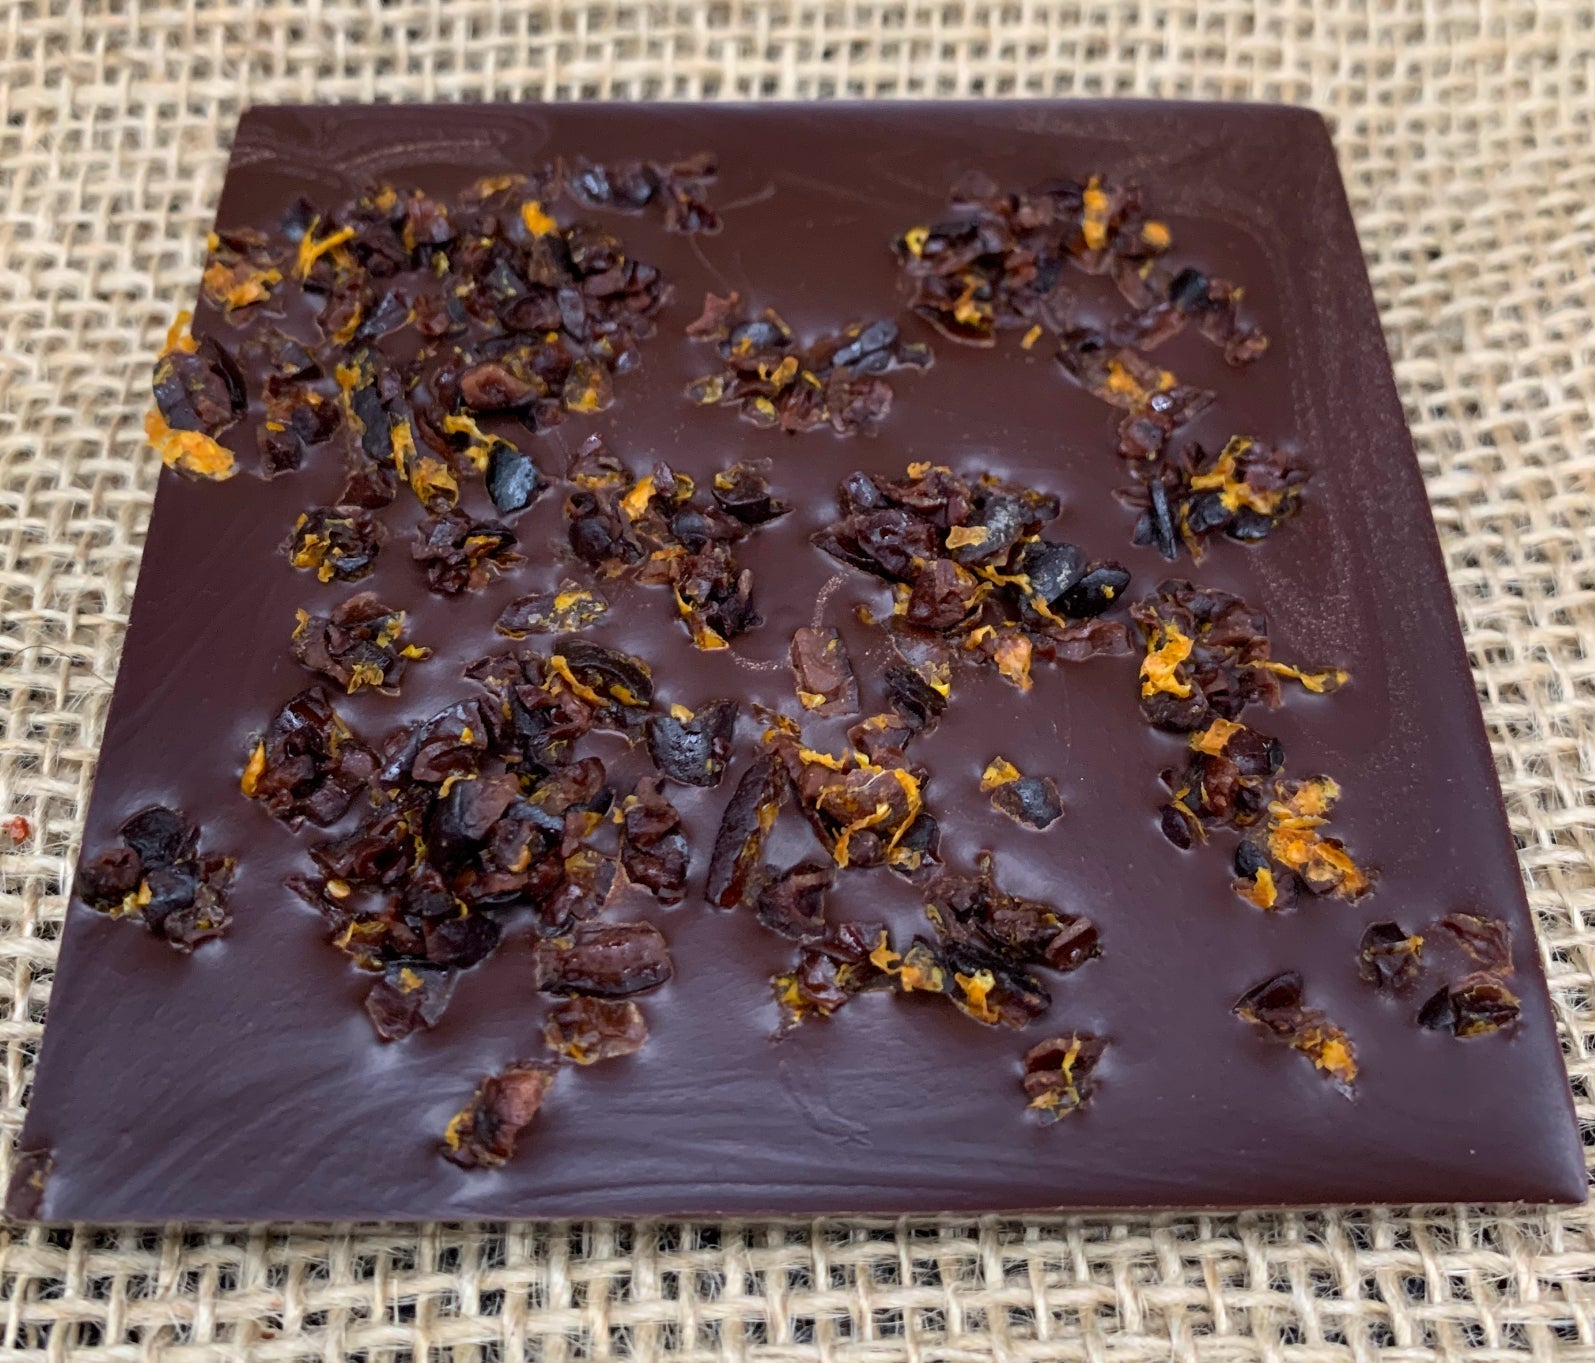 the back of a dark chocolate bar with negroni soaked nibs and orange peel